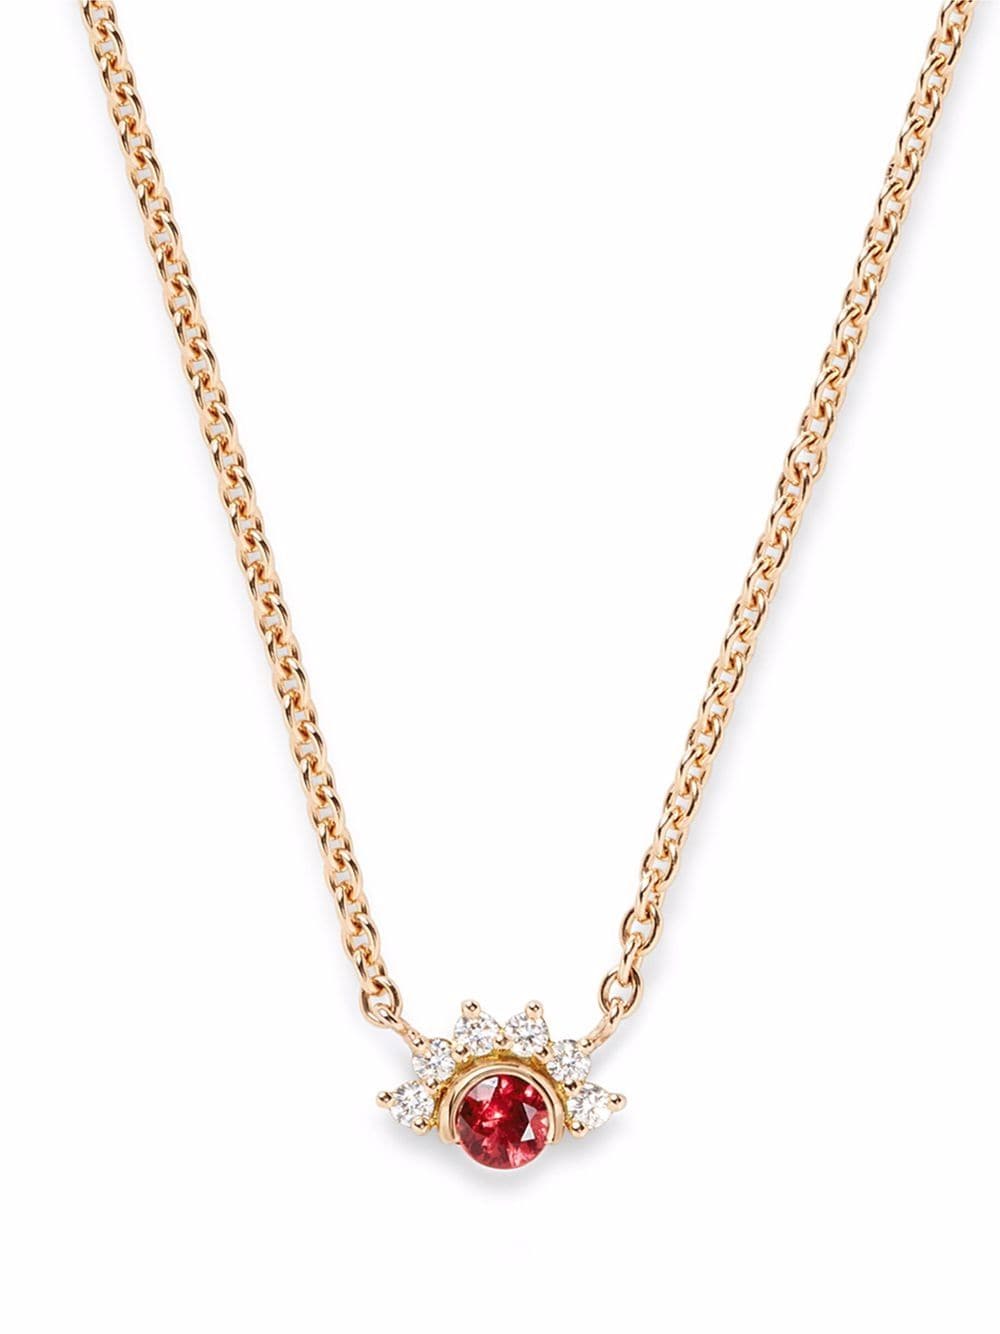 18kt yellow gold Mystic red spinel and diamond necklace